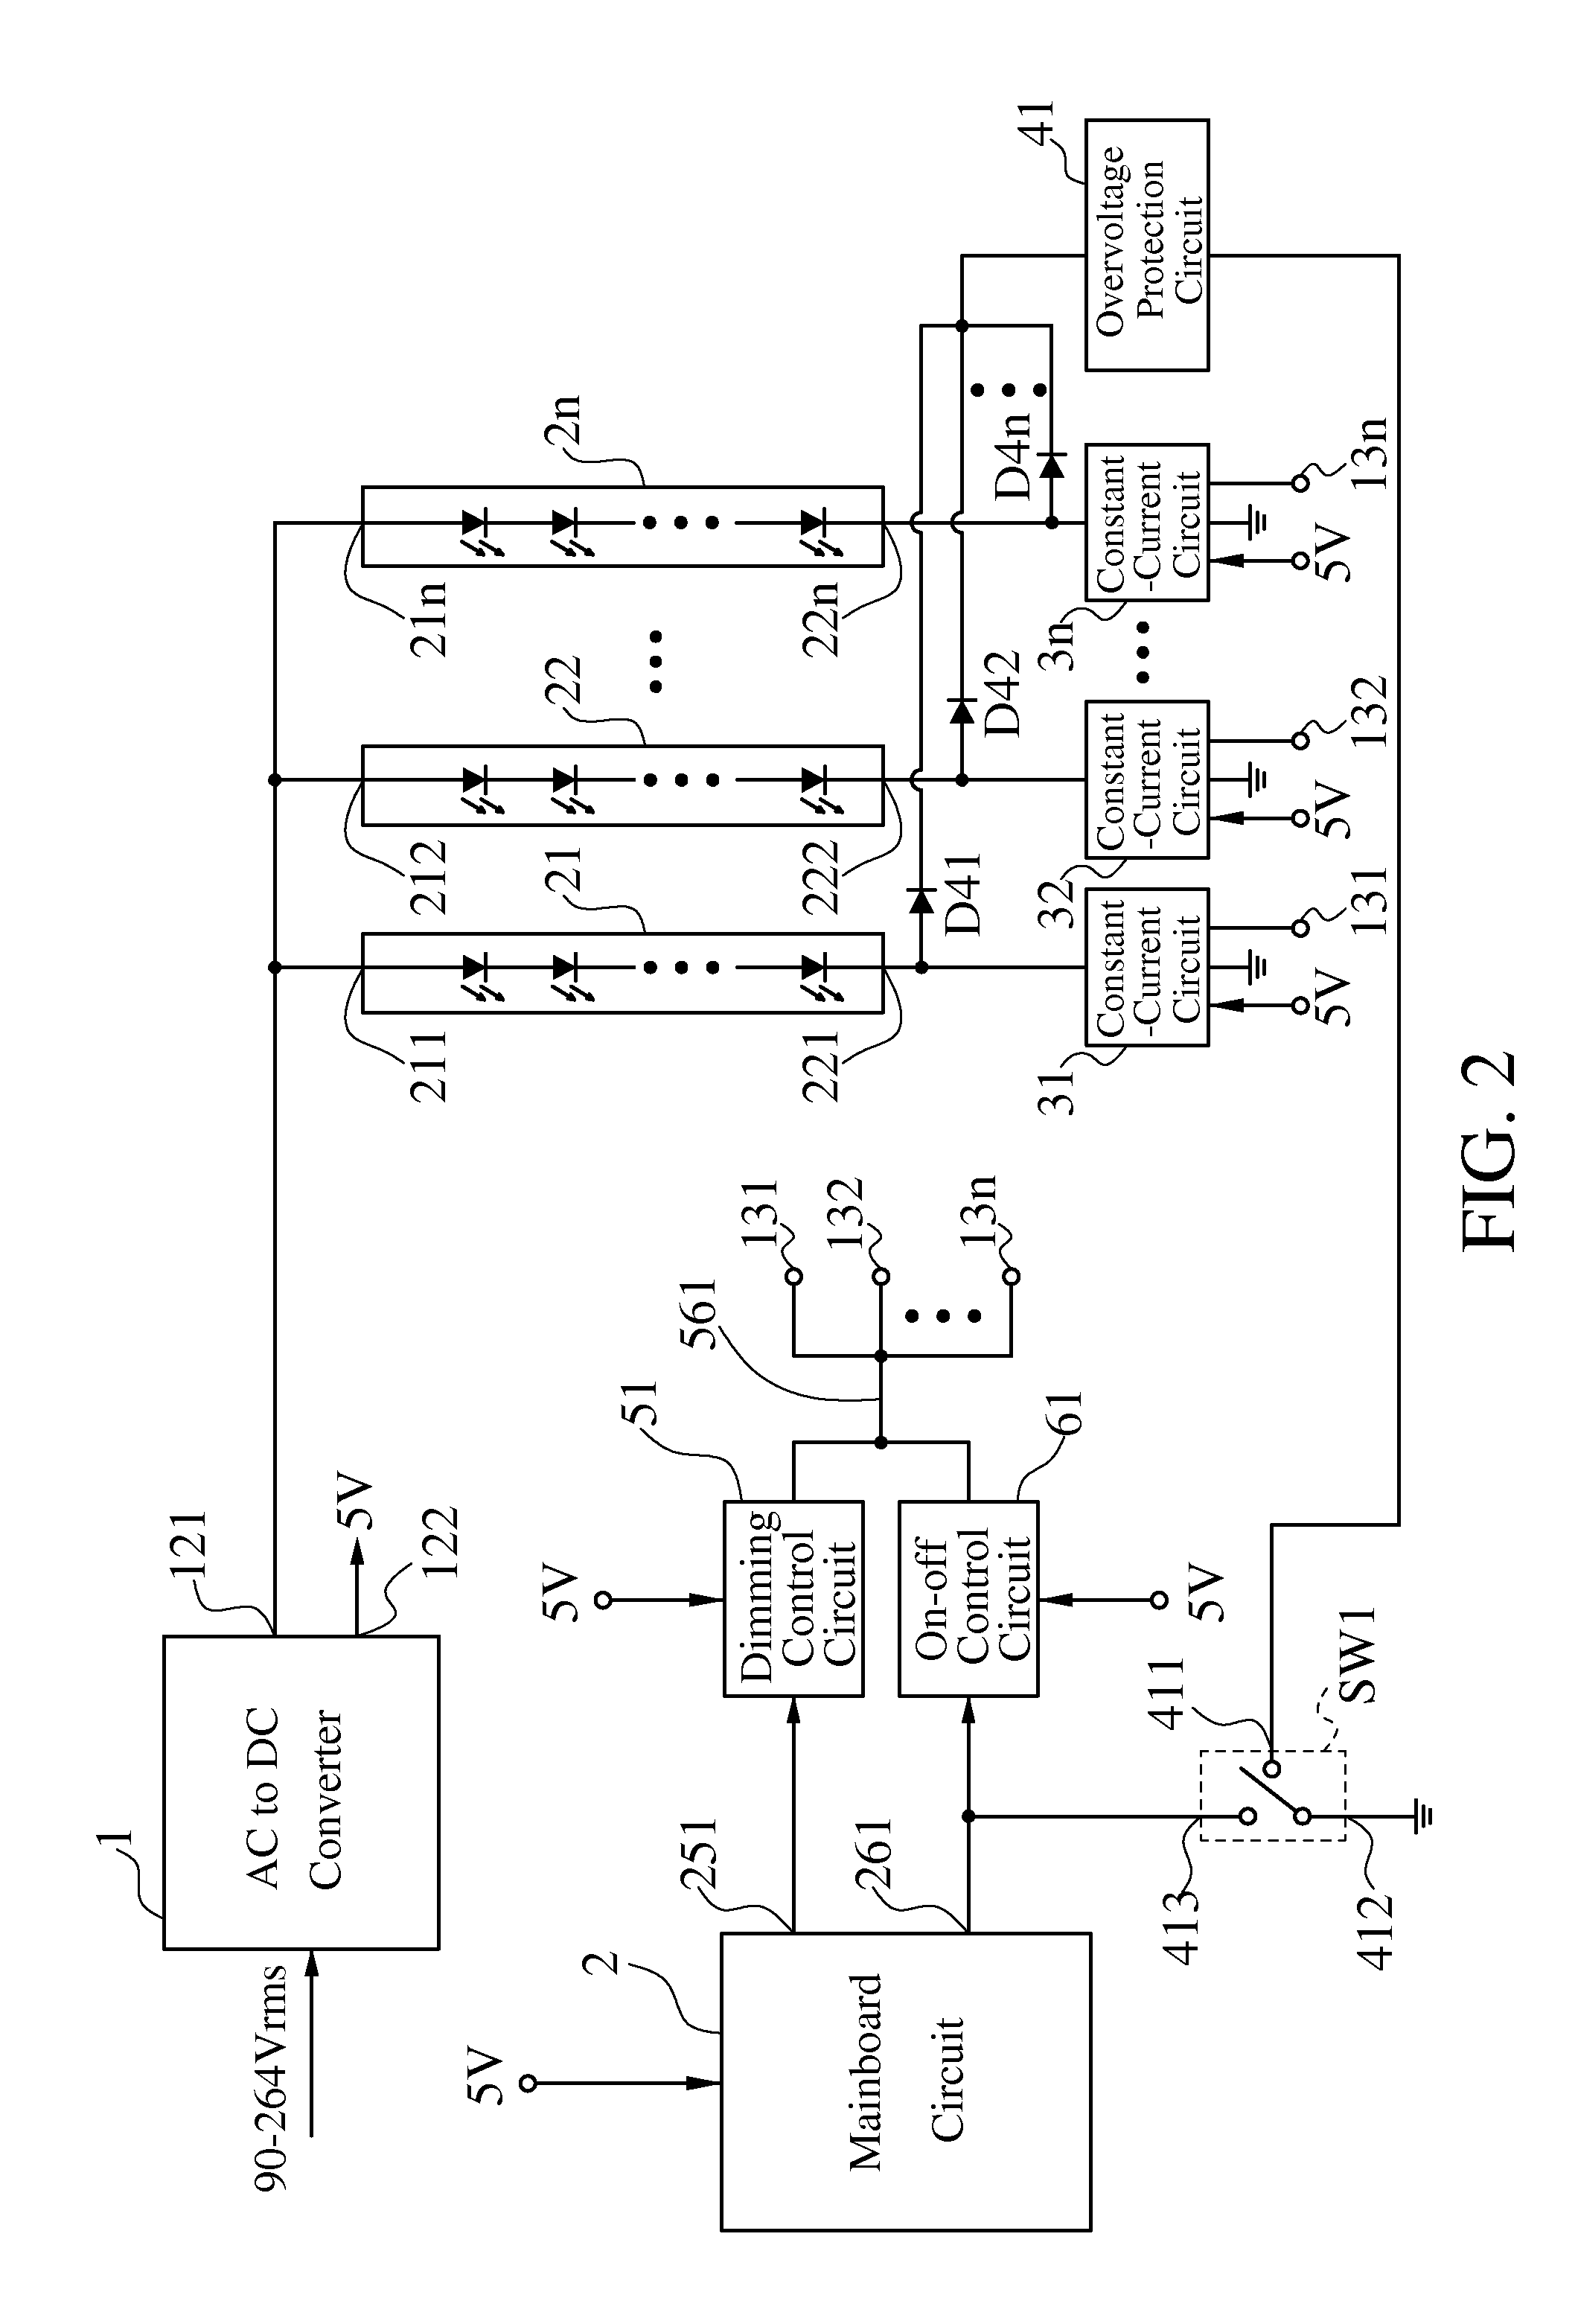 Driving circuit for LED lamp